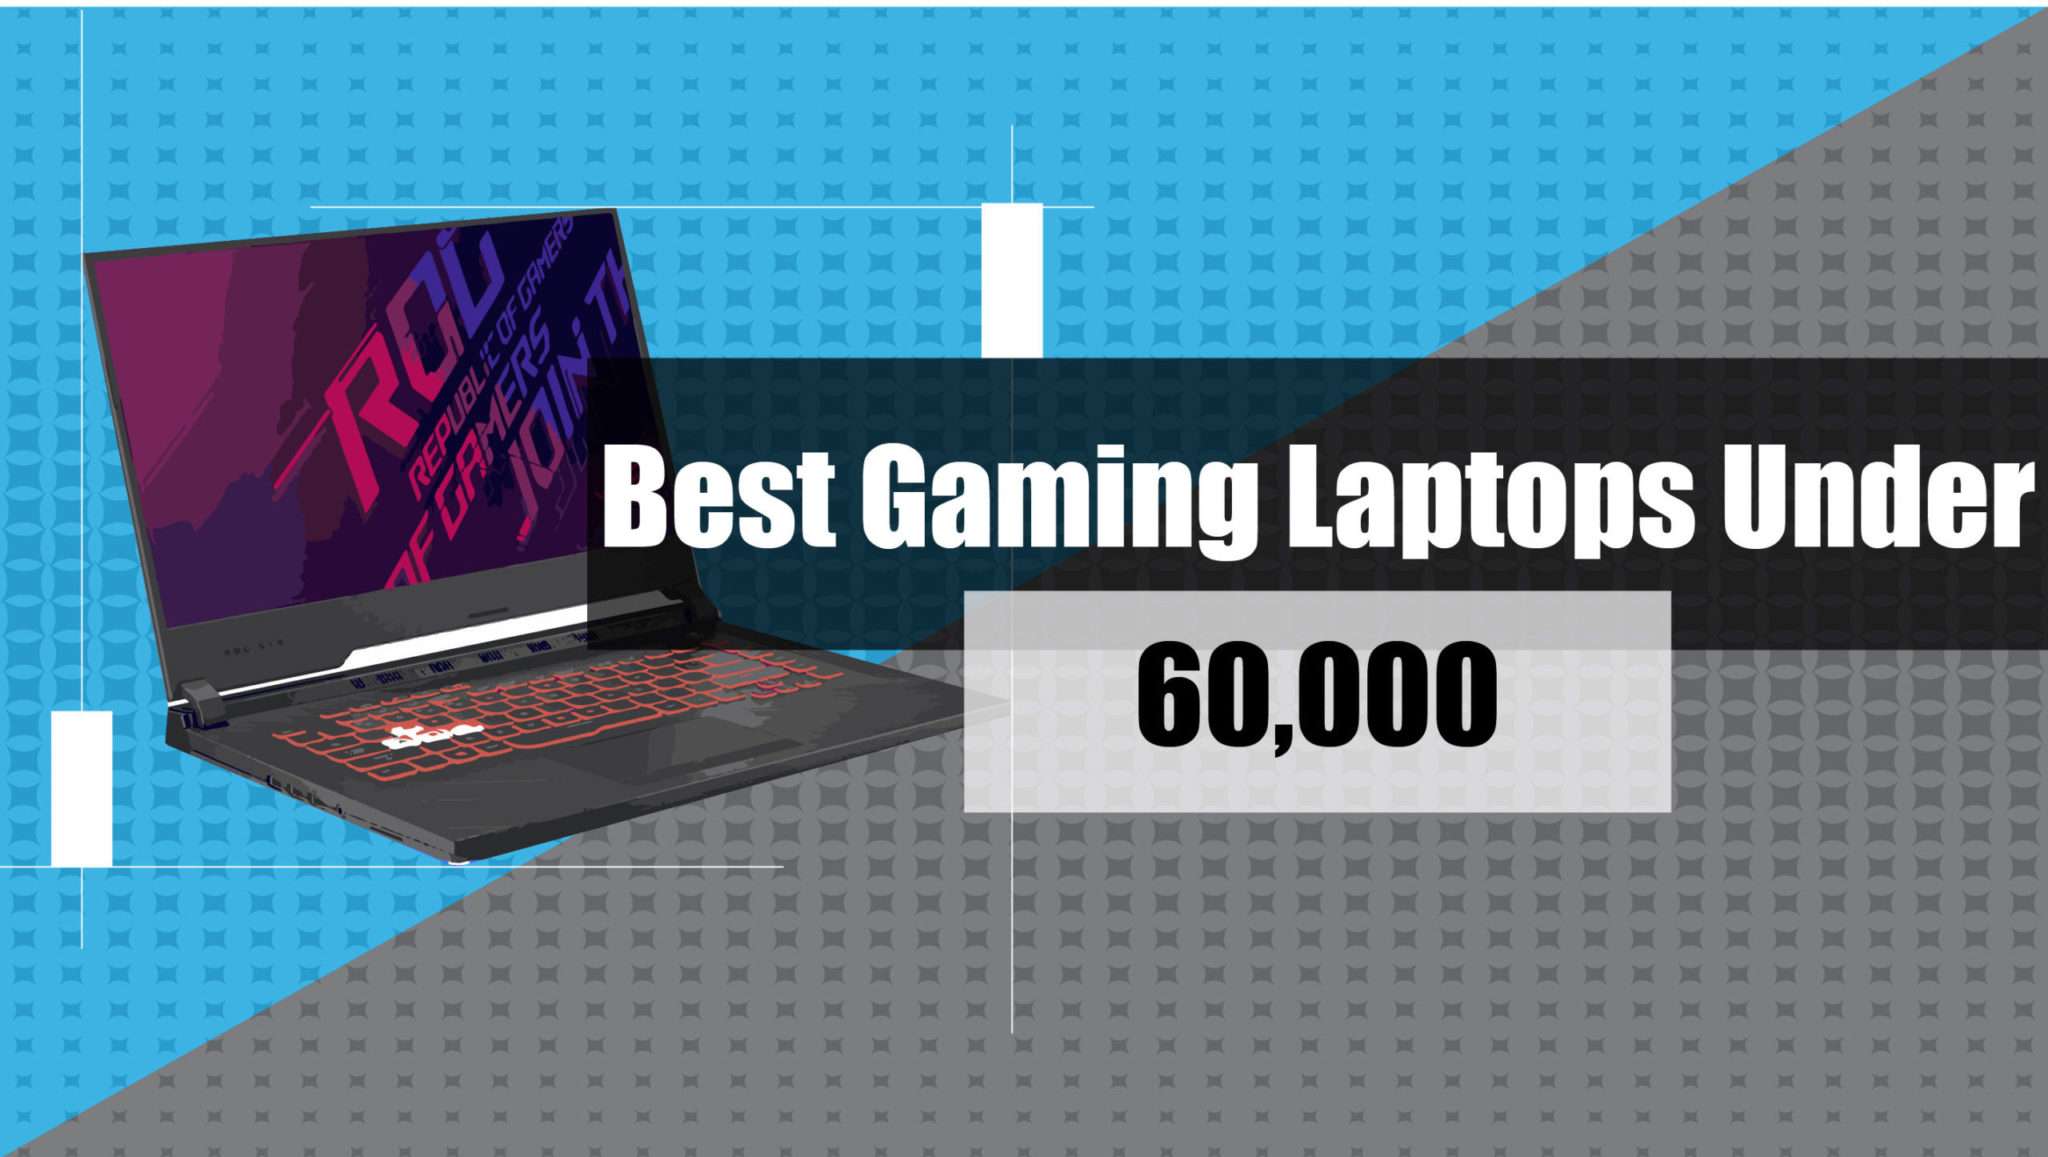 Costume Best Gaming Pc Under 60000 In India 2021 with Dual Monitor